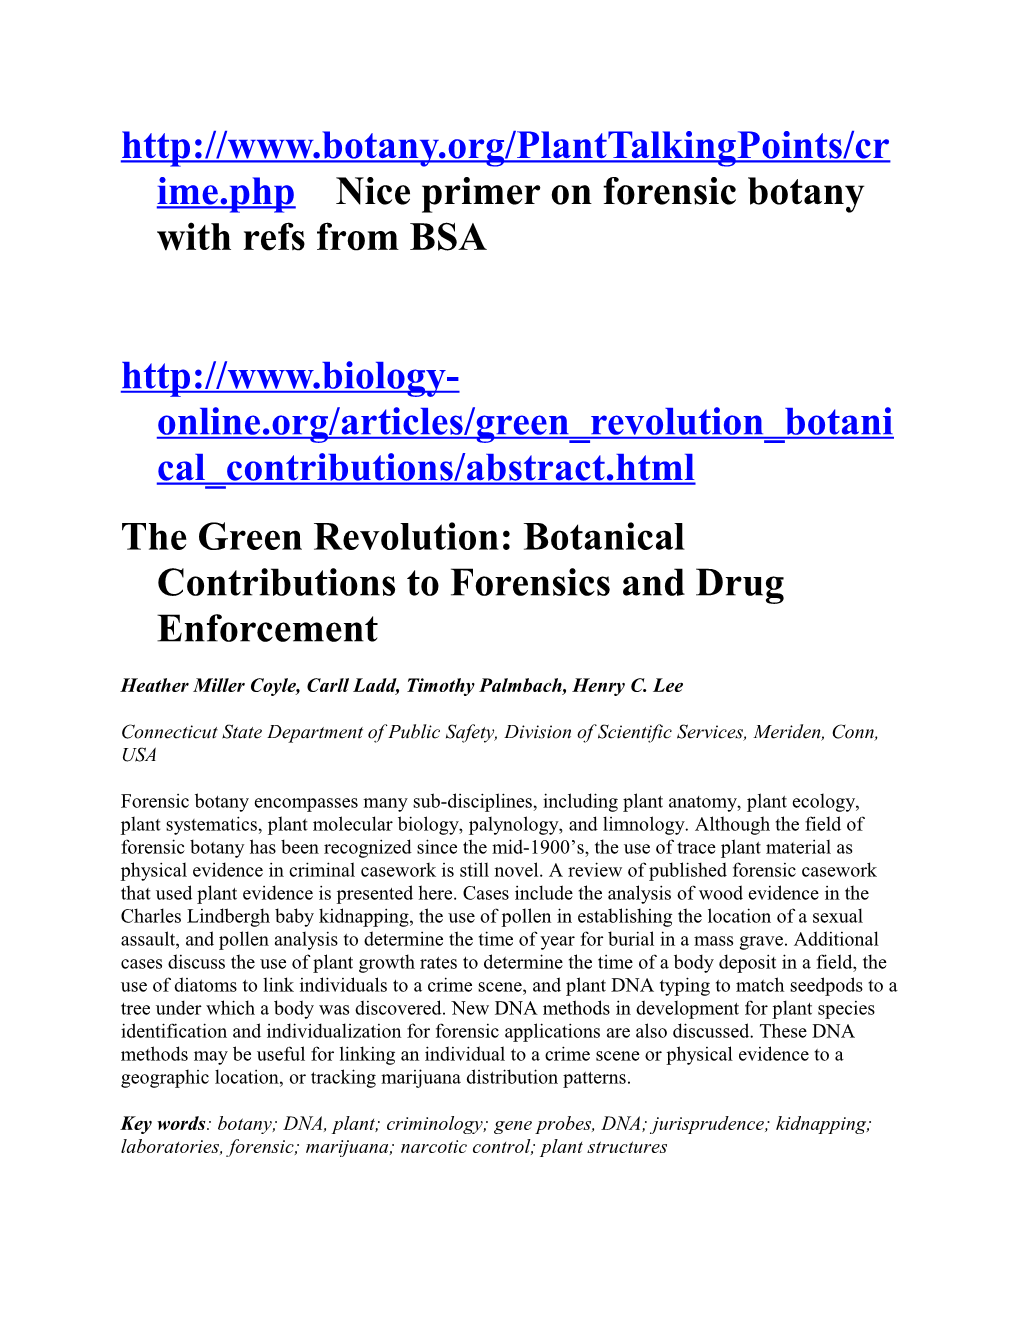 Nice Primer on Forensic Botany with Refs from BSA